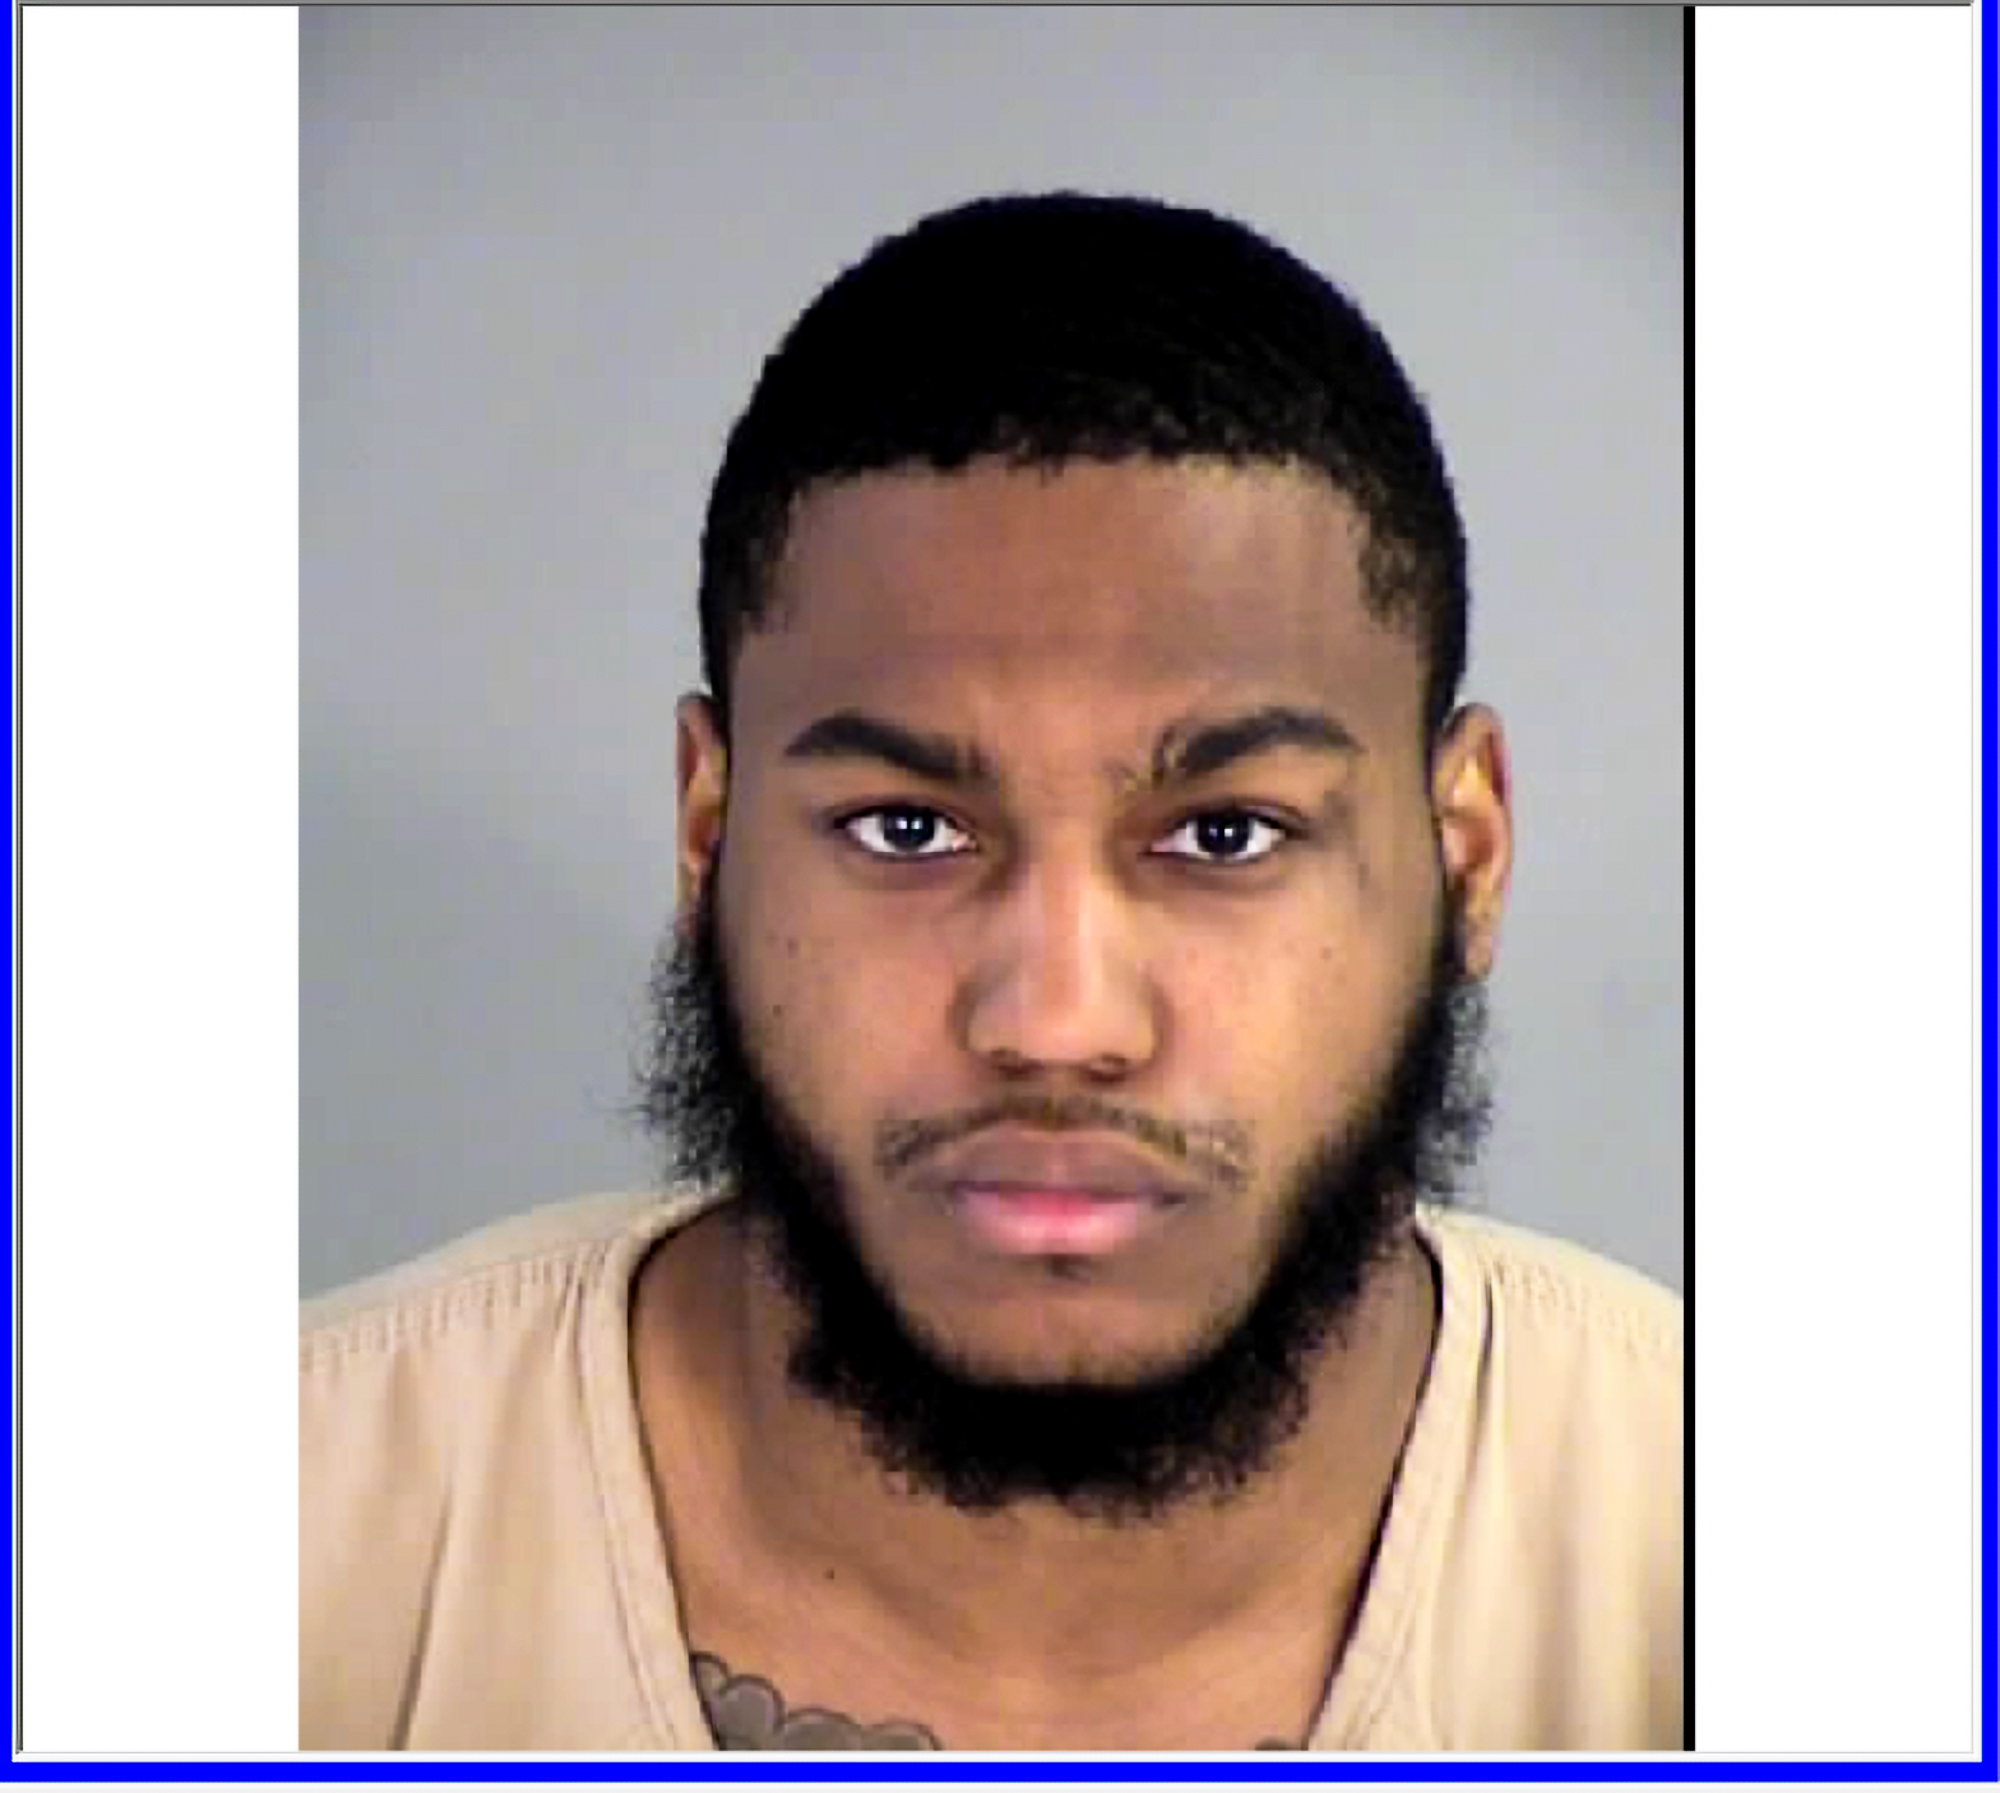 Christopher Darnell Jones' booking photo. Jones is charged with three counts of second-degree murder. Photo credit: Henrico County Sheriff's Office